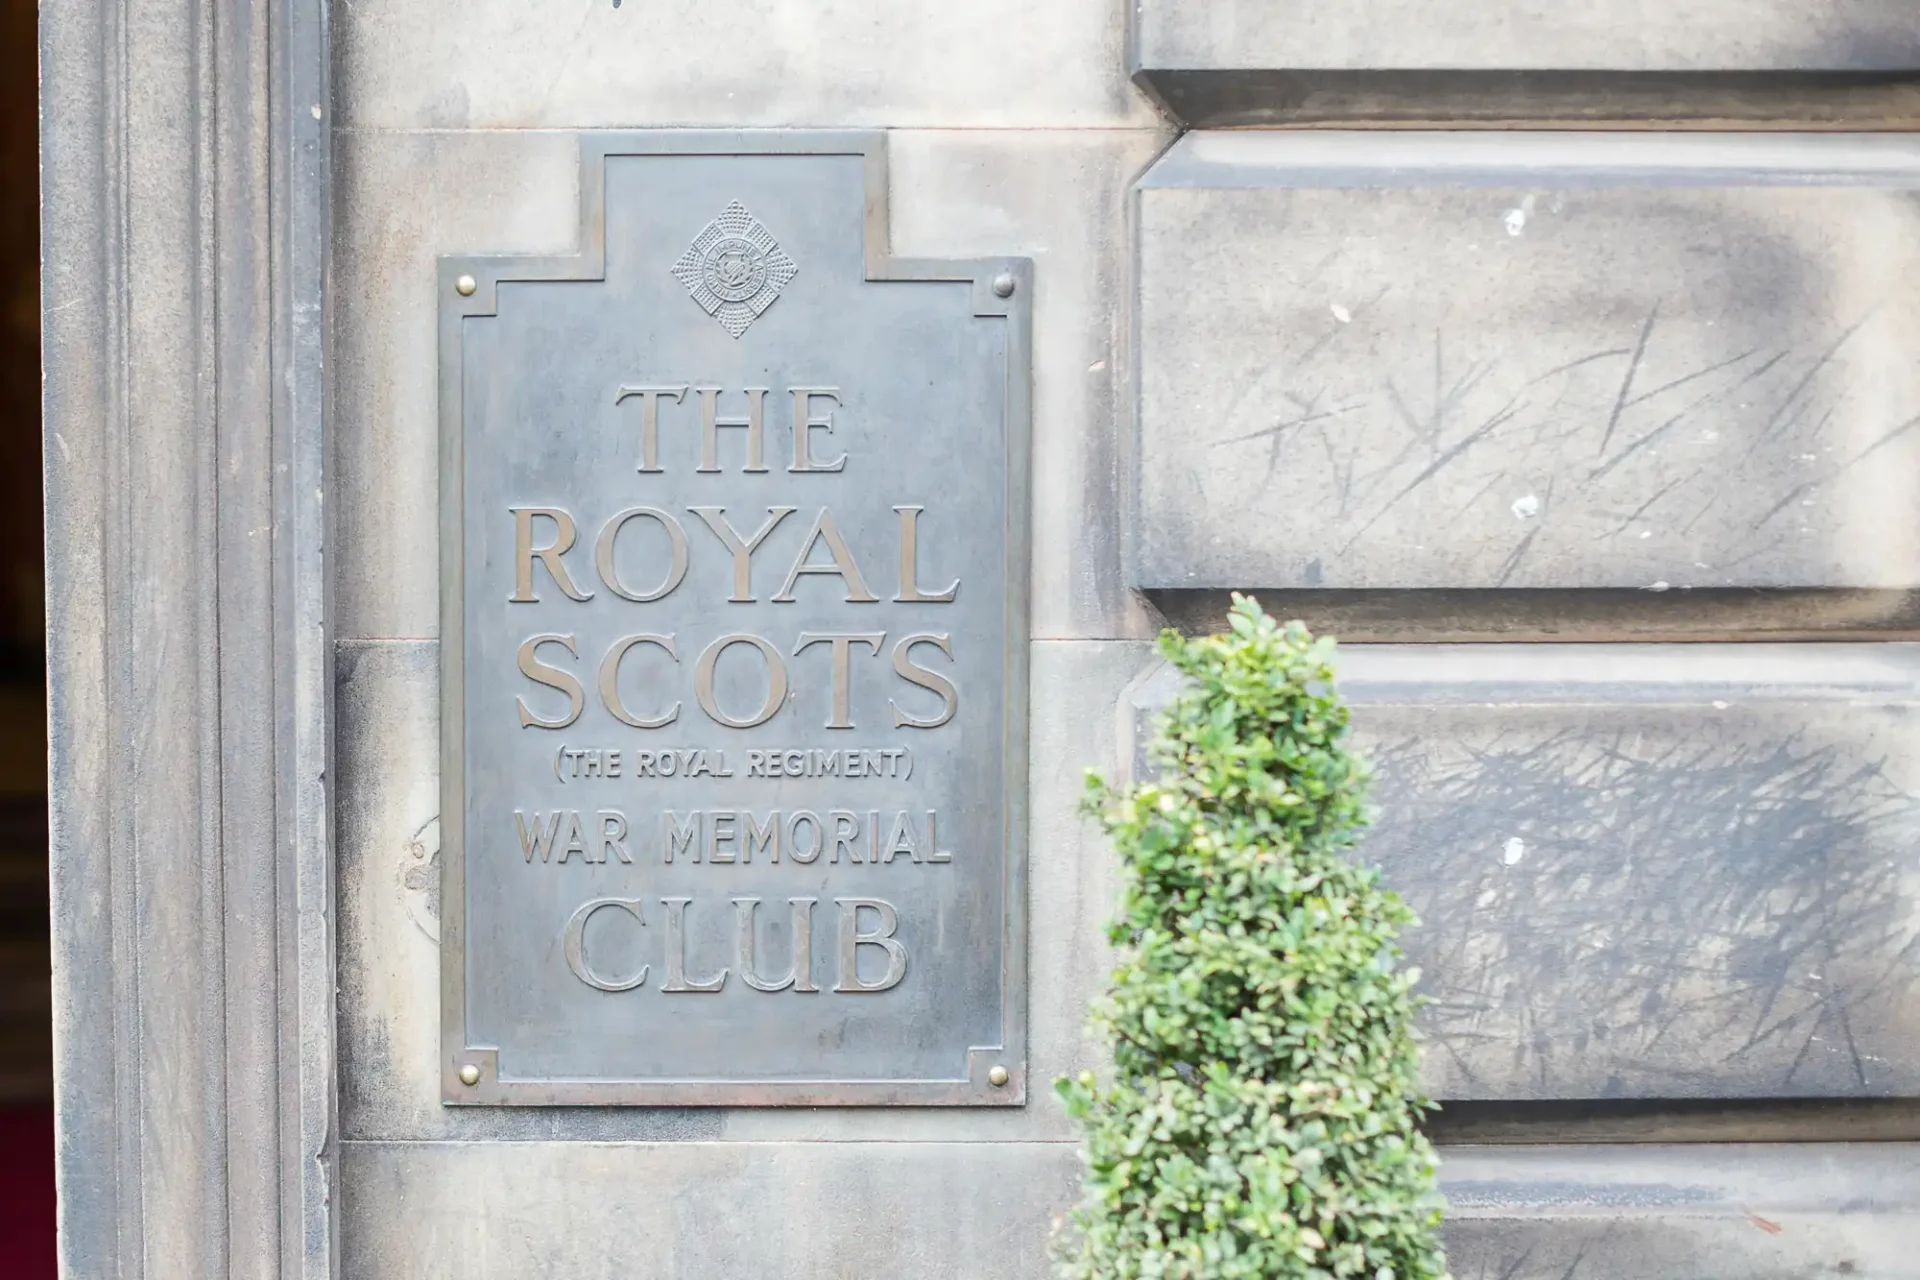 Bronze plaque labeled "the royal scots (the royal regiment) war memorial club" mounted on a stone wall beside a shrub.